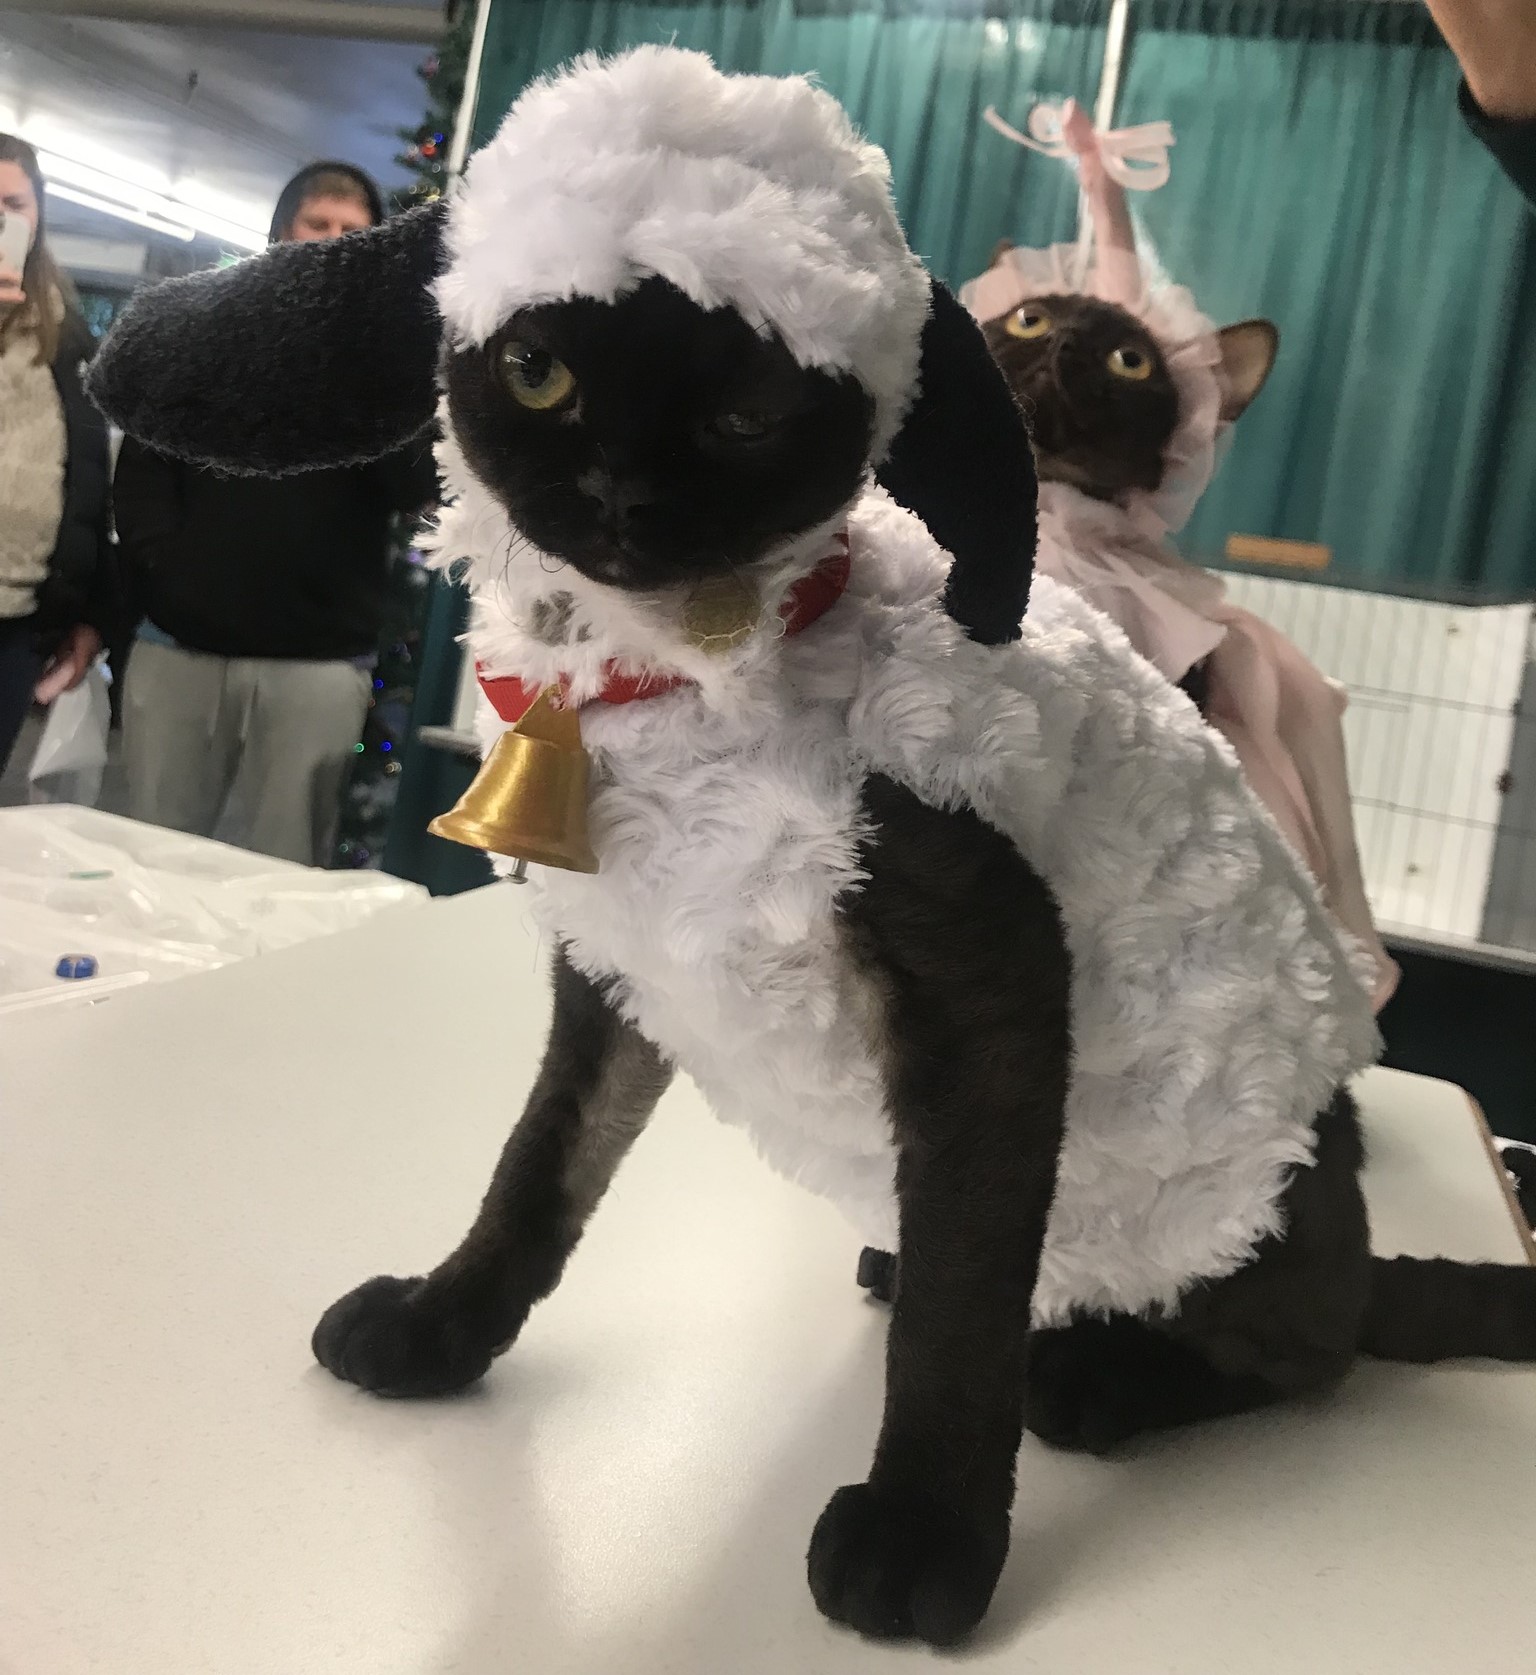 A black cat is dressed in a white sheep costume, with a gold bell around its neck. It is sitting on a white table.